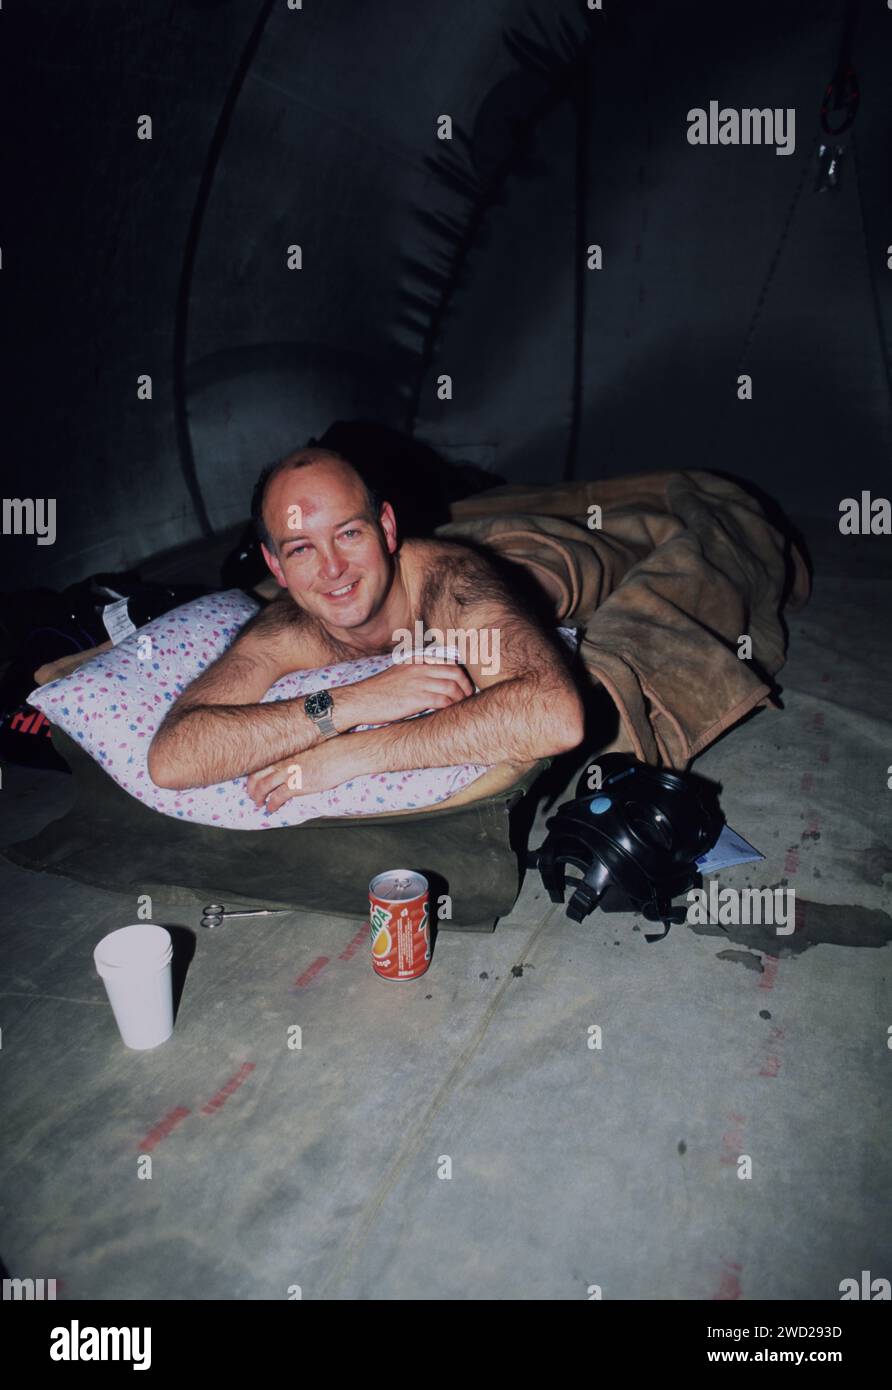 22nd January 1991 Wing Commander Mike Heath in a hospital tent at the King Faisal Airbase in Tabuk after ejecting from his Tornado jet. Stock Photo